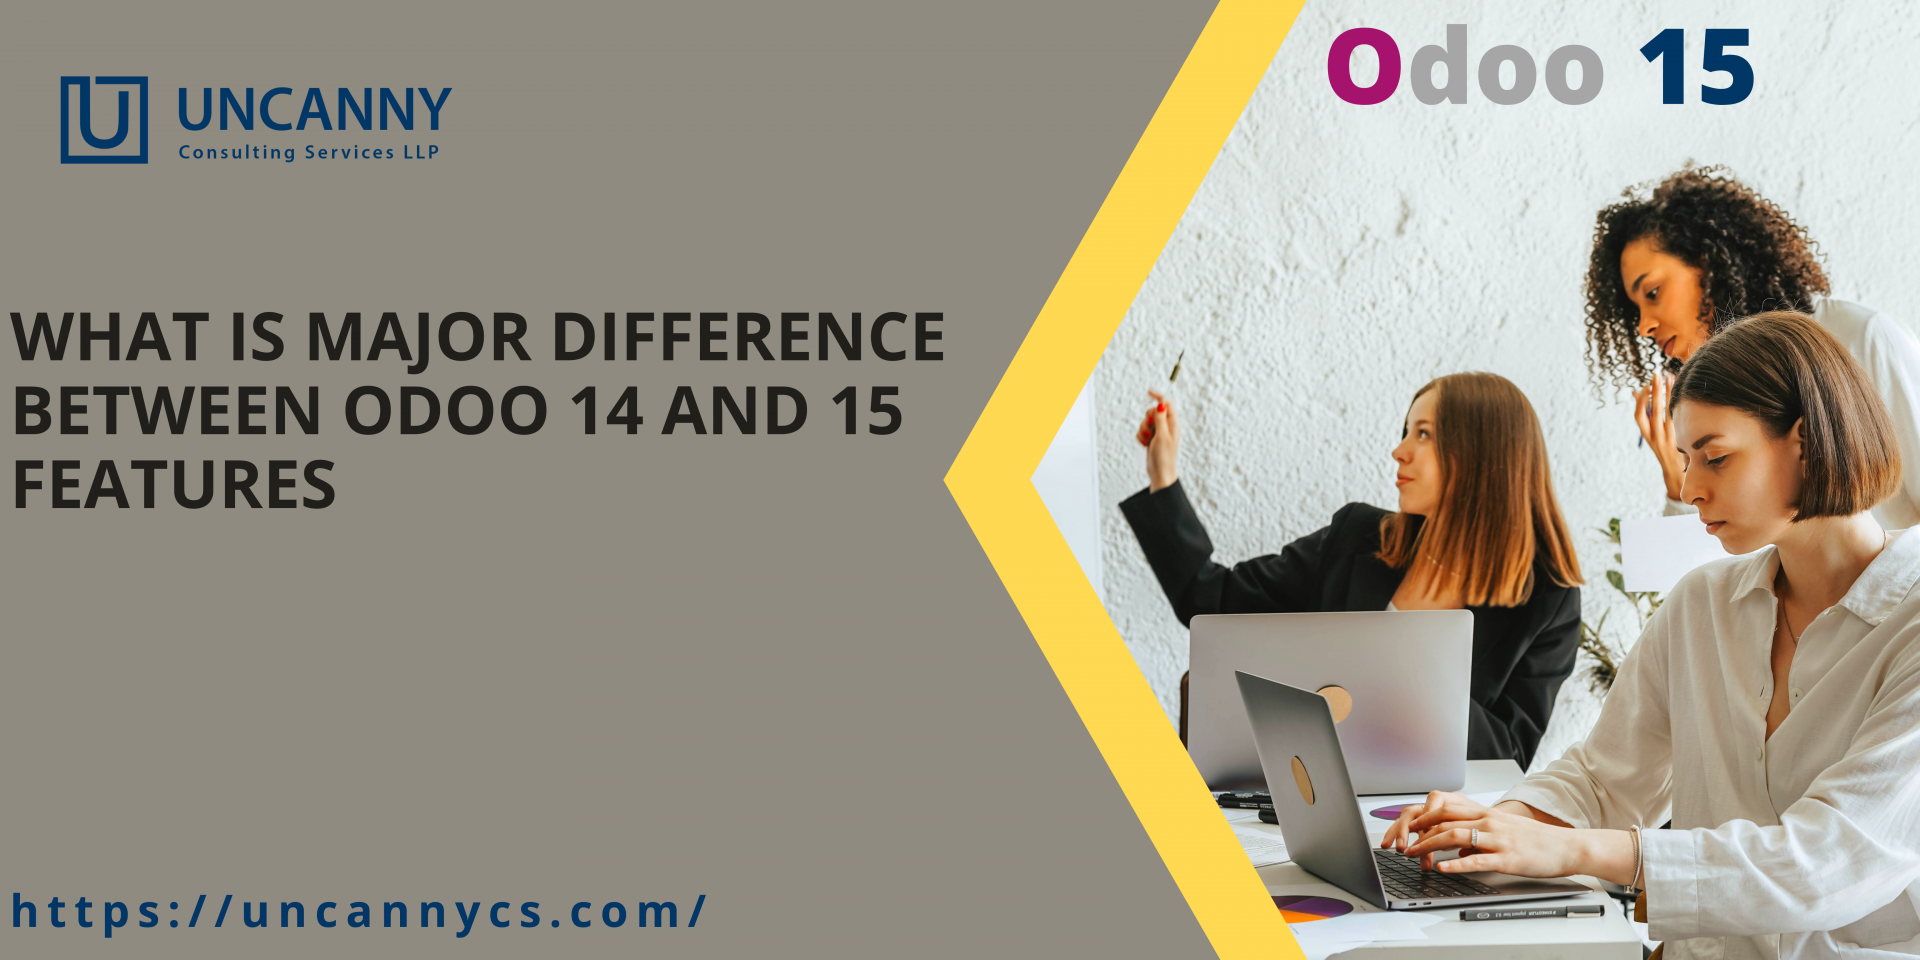 What is major difference between Odoo 14 and 15 features